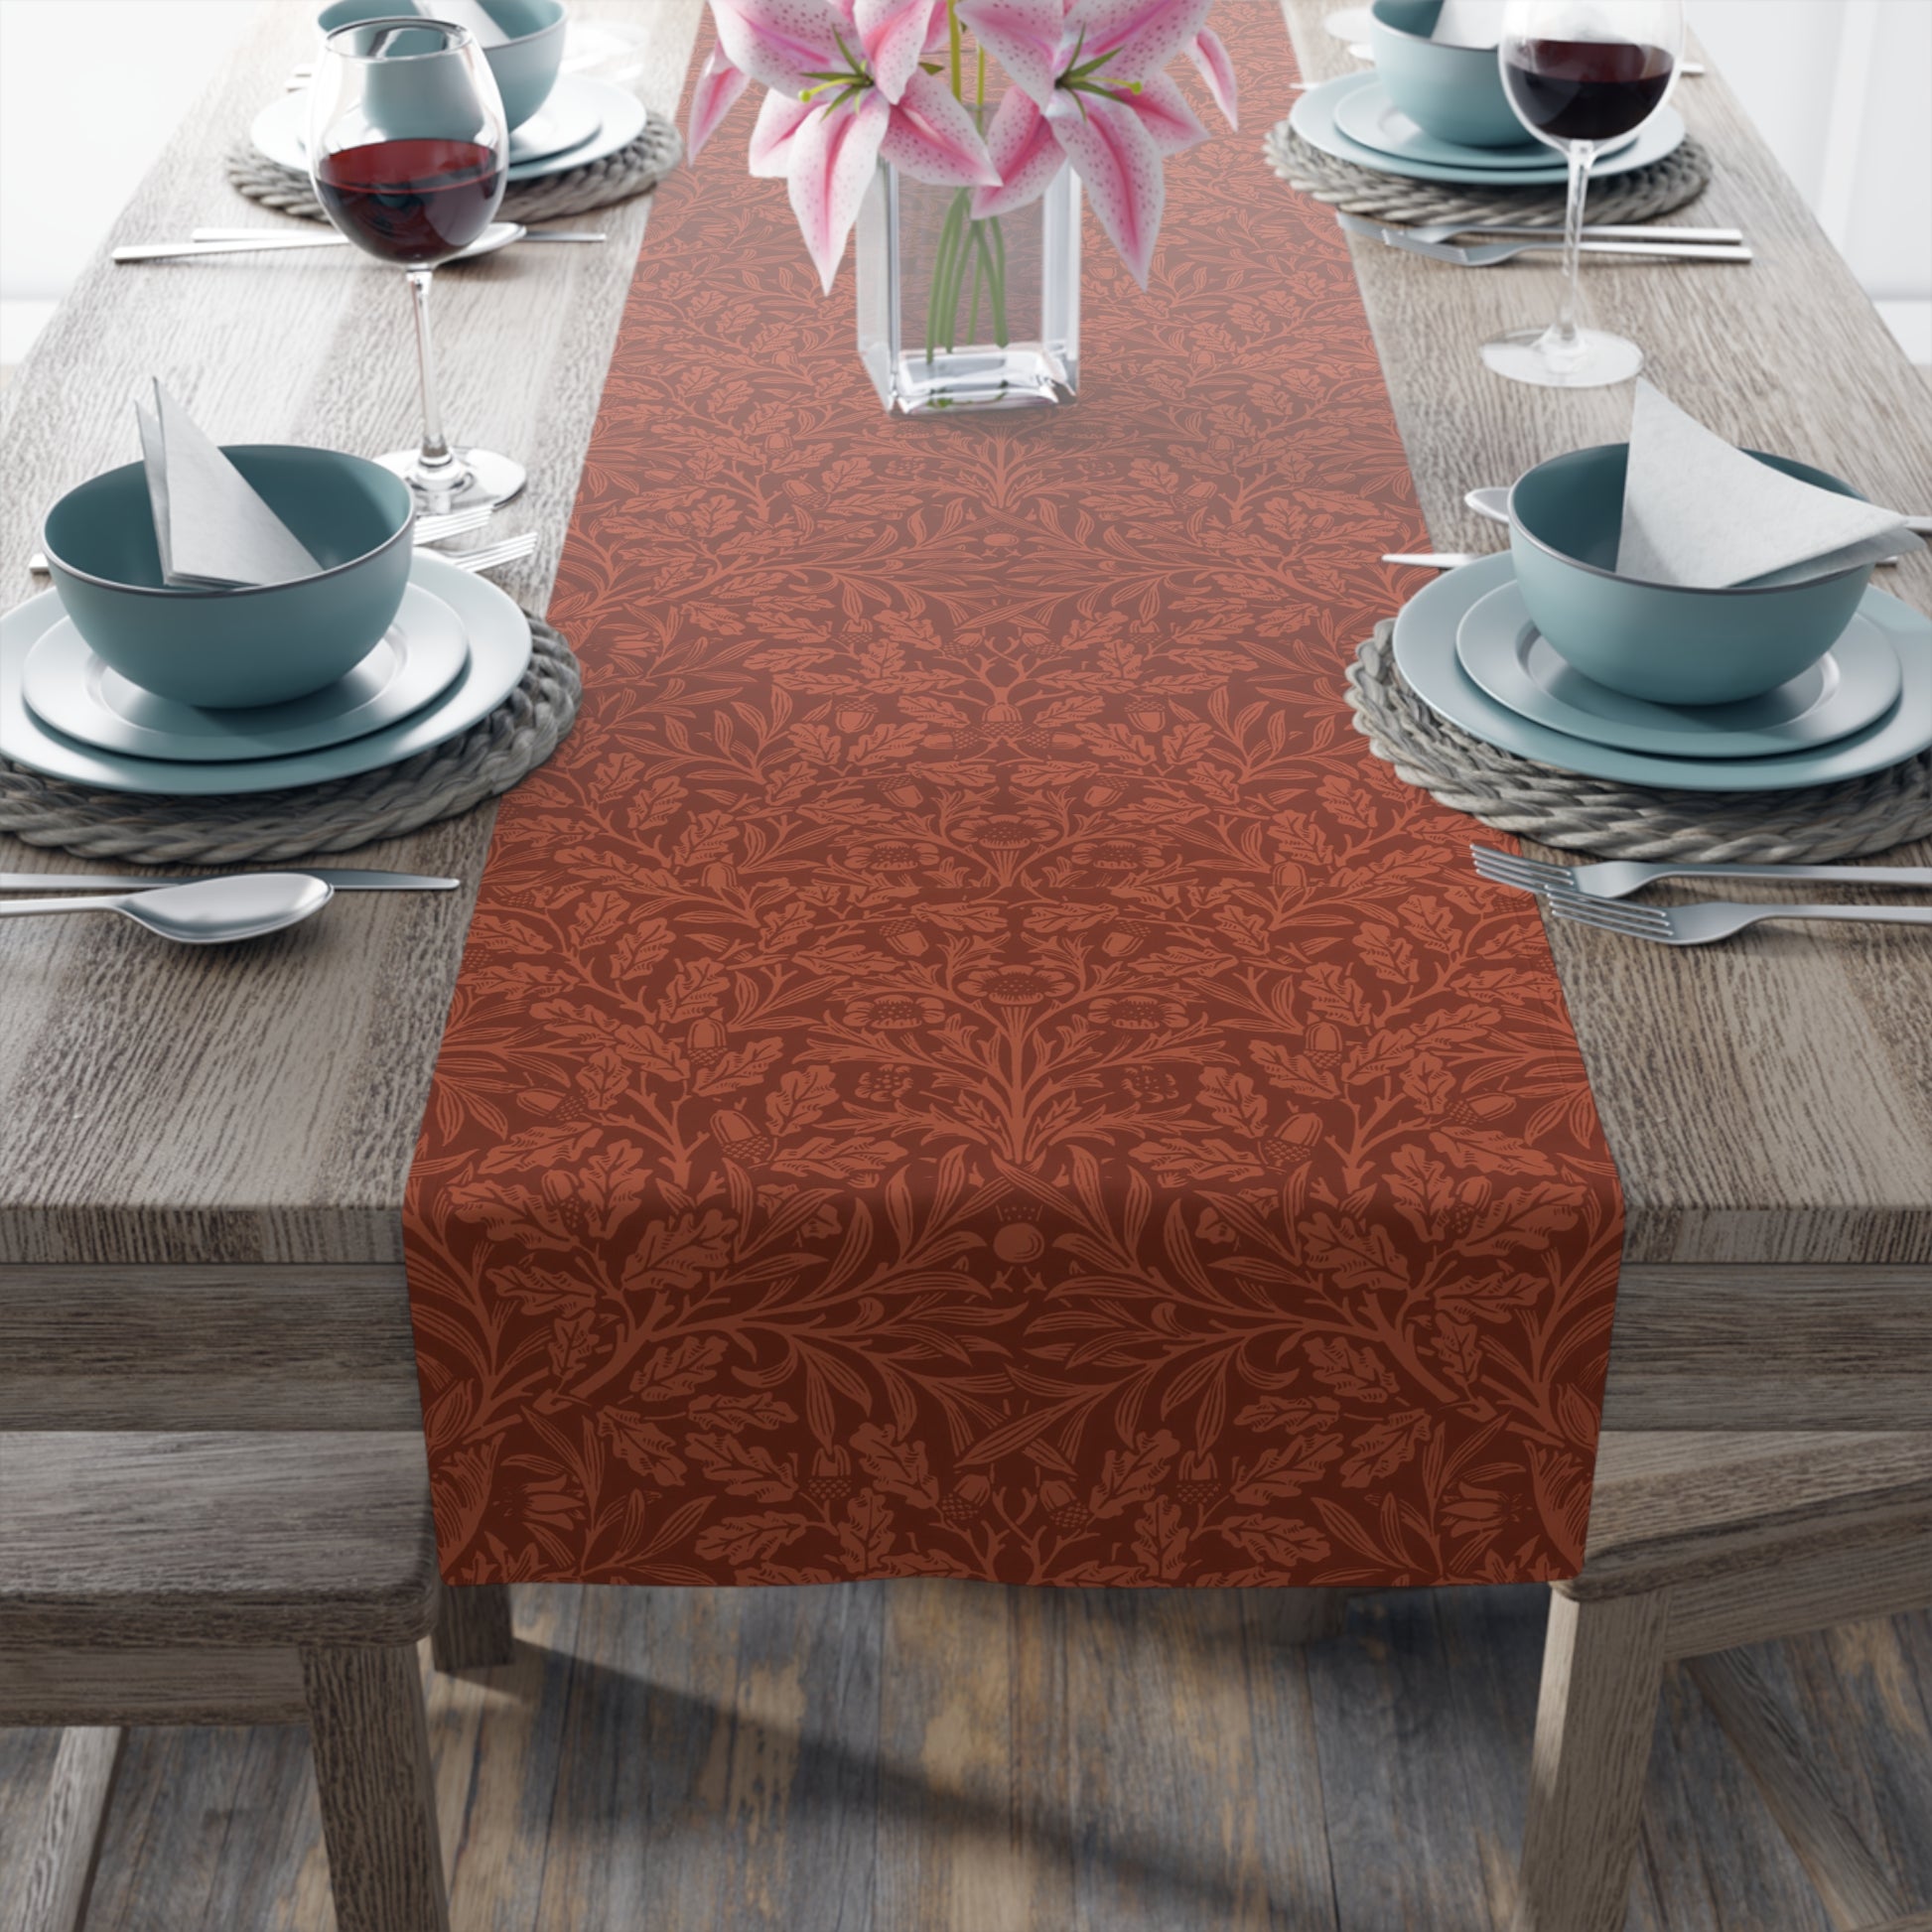 william-morris-co-table-runner-acorns-and-oak-leaves-collection-rust-4